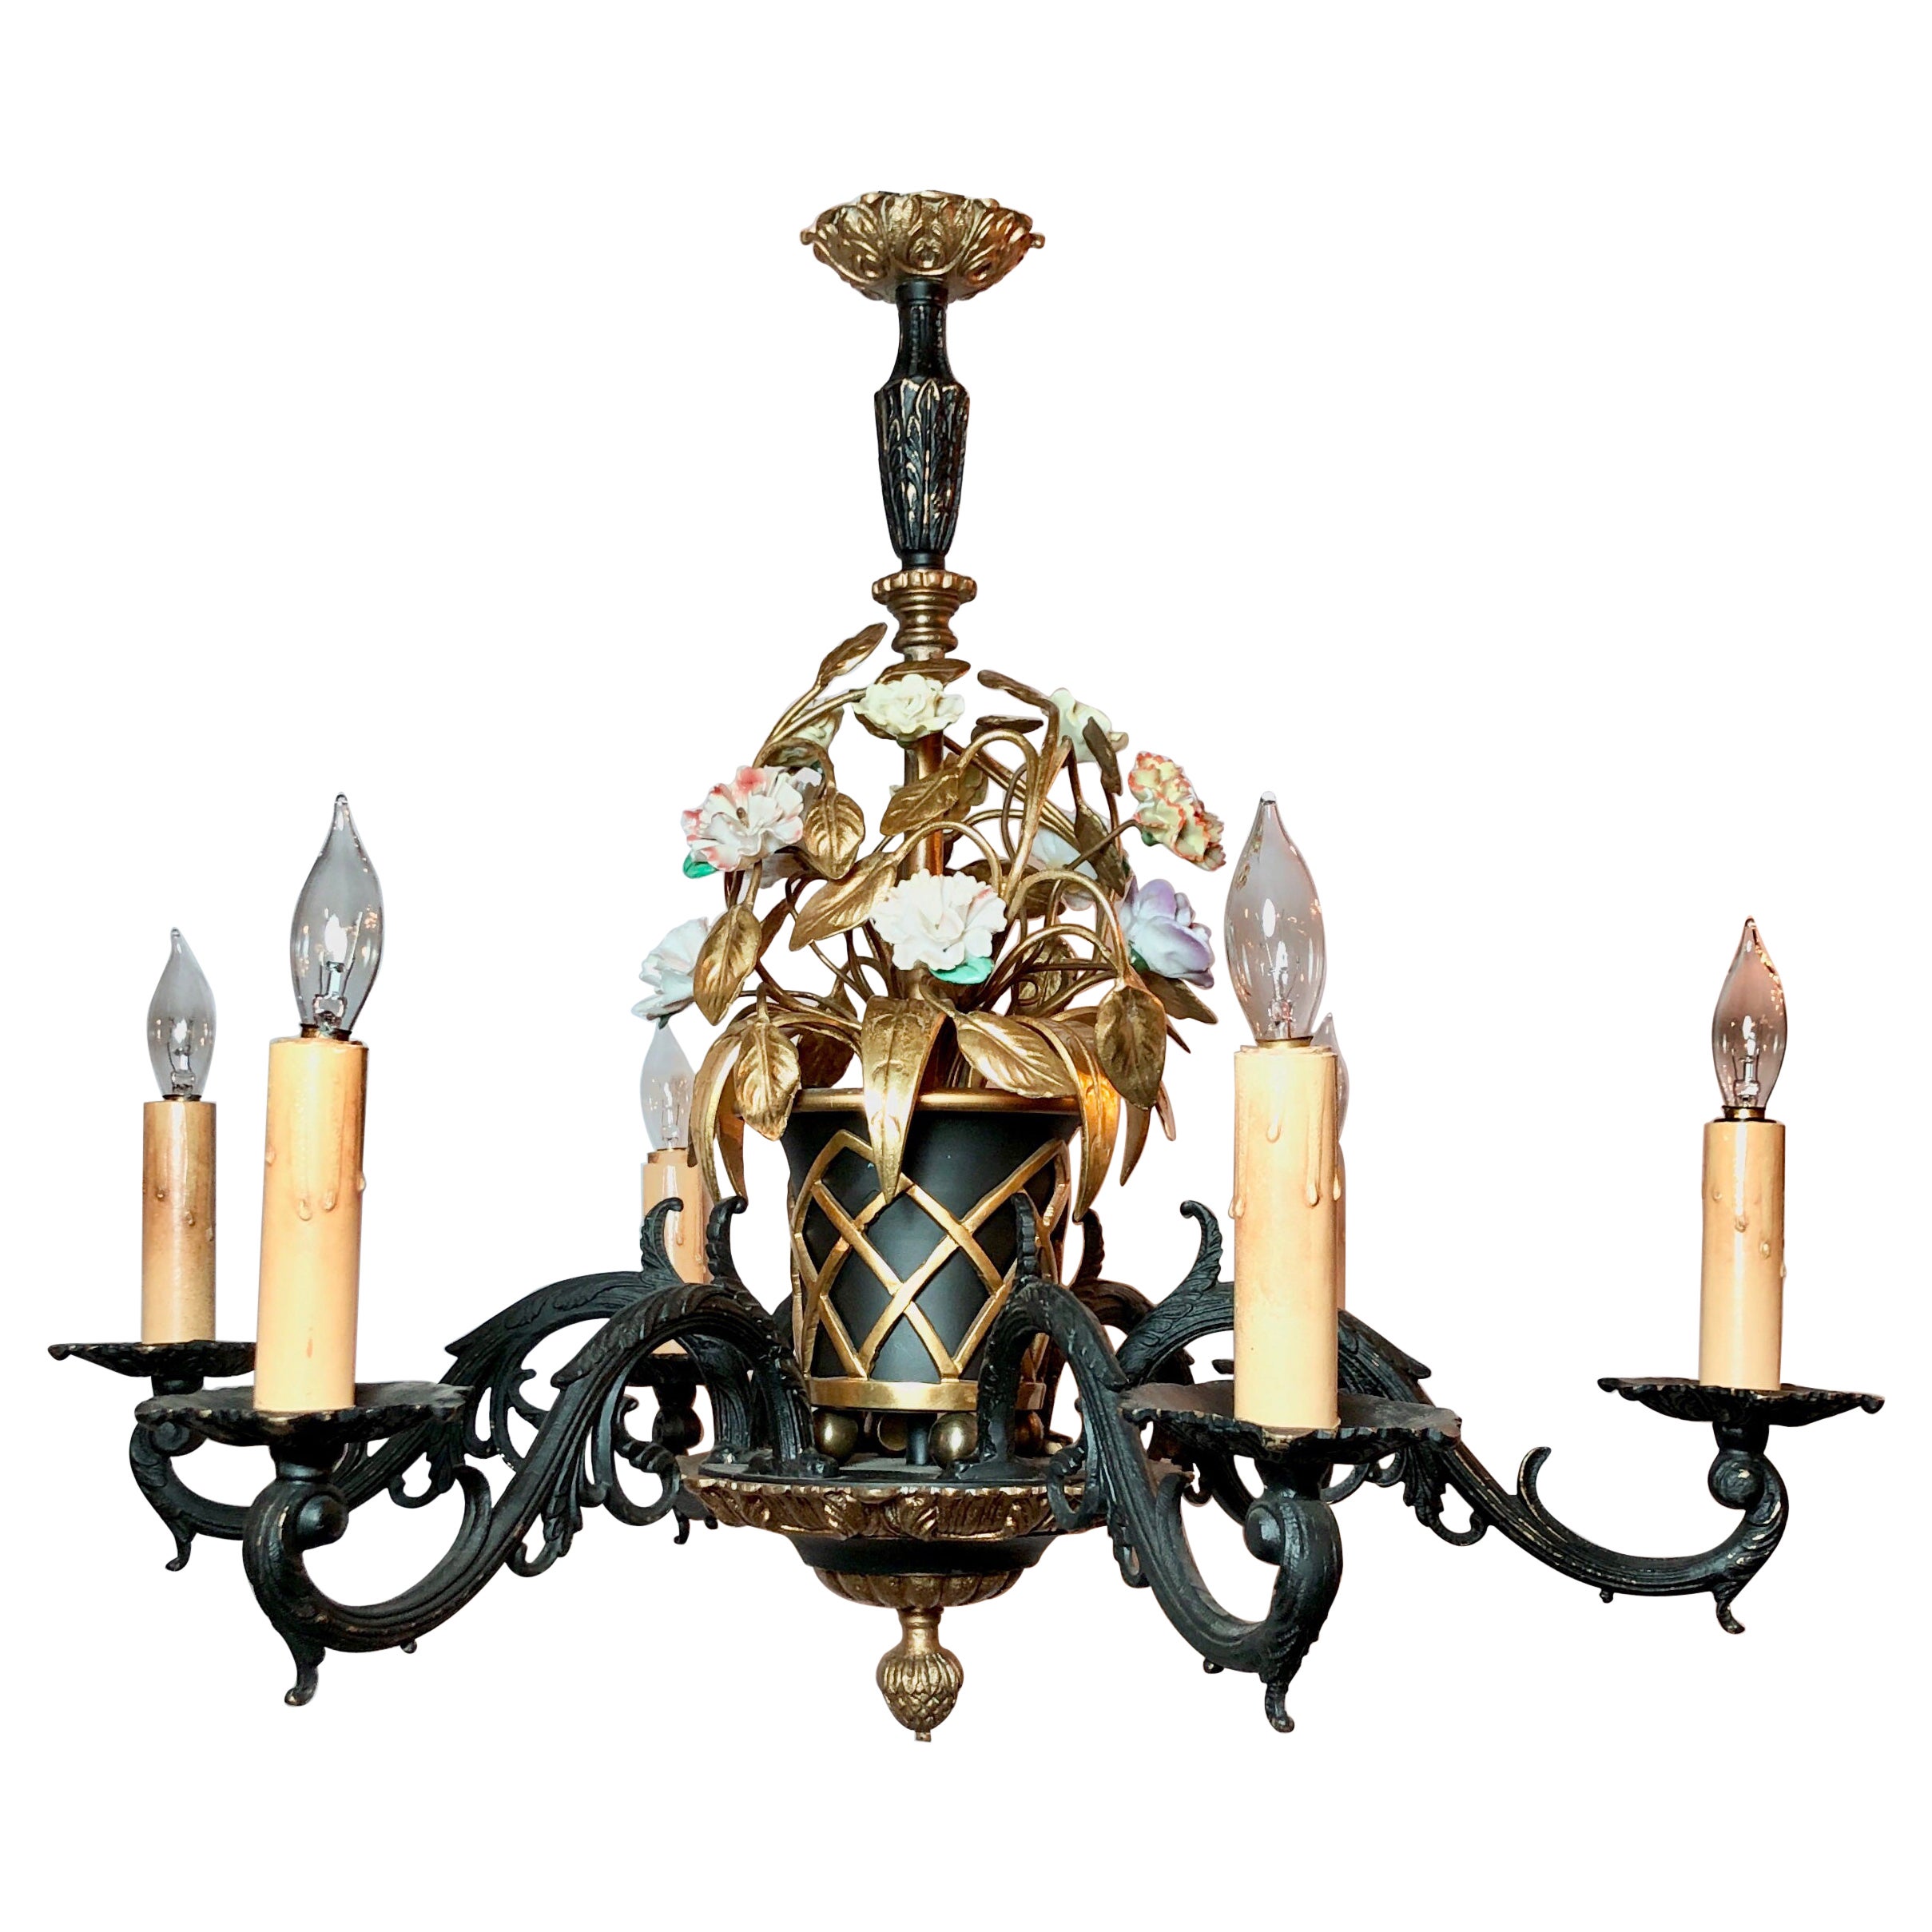 Antique French "Marie Antoinette" Iron & Brass Chandelier with Porcelain Flowers